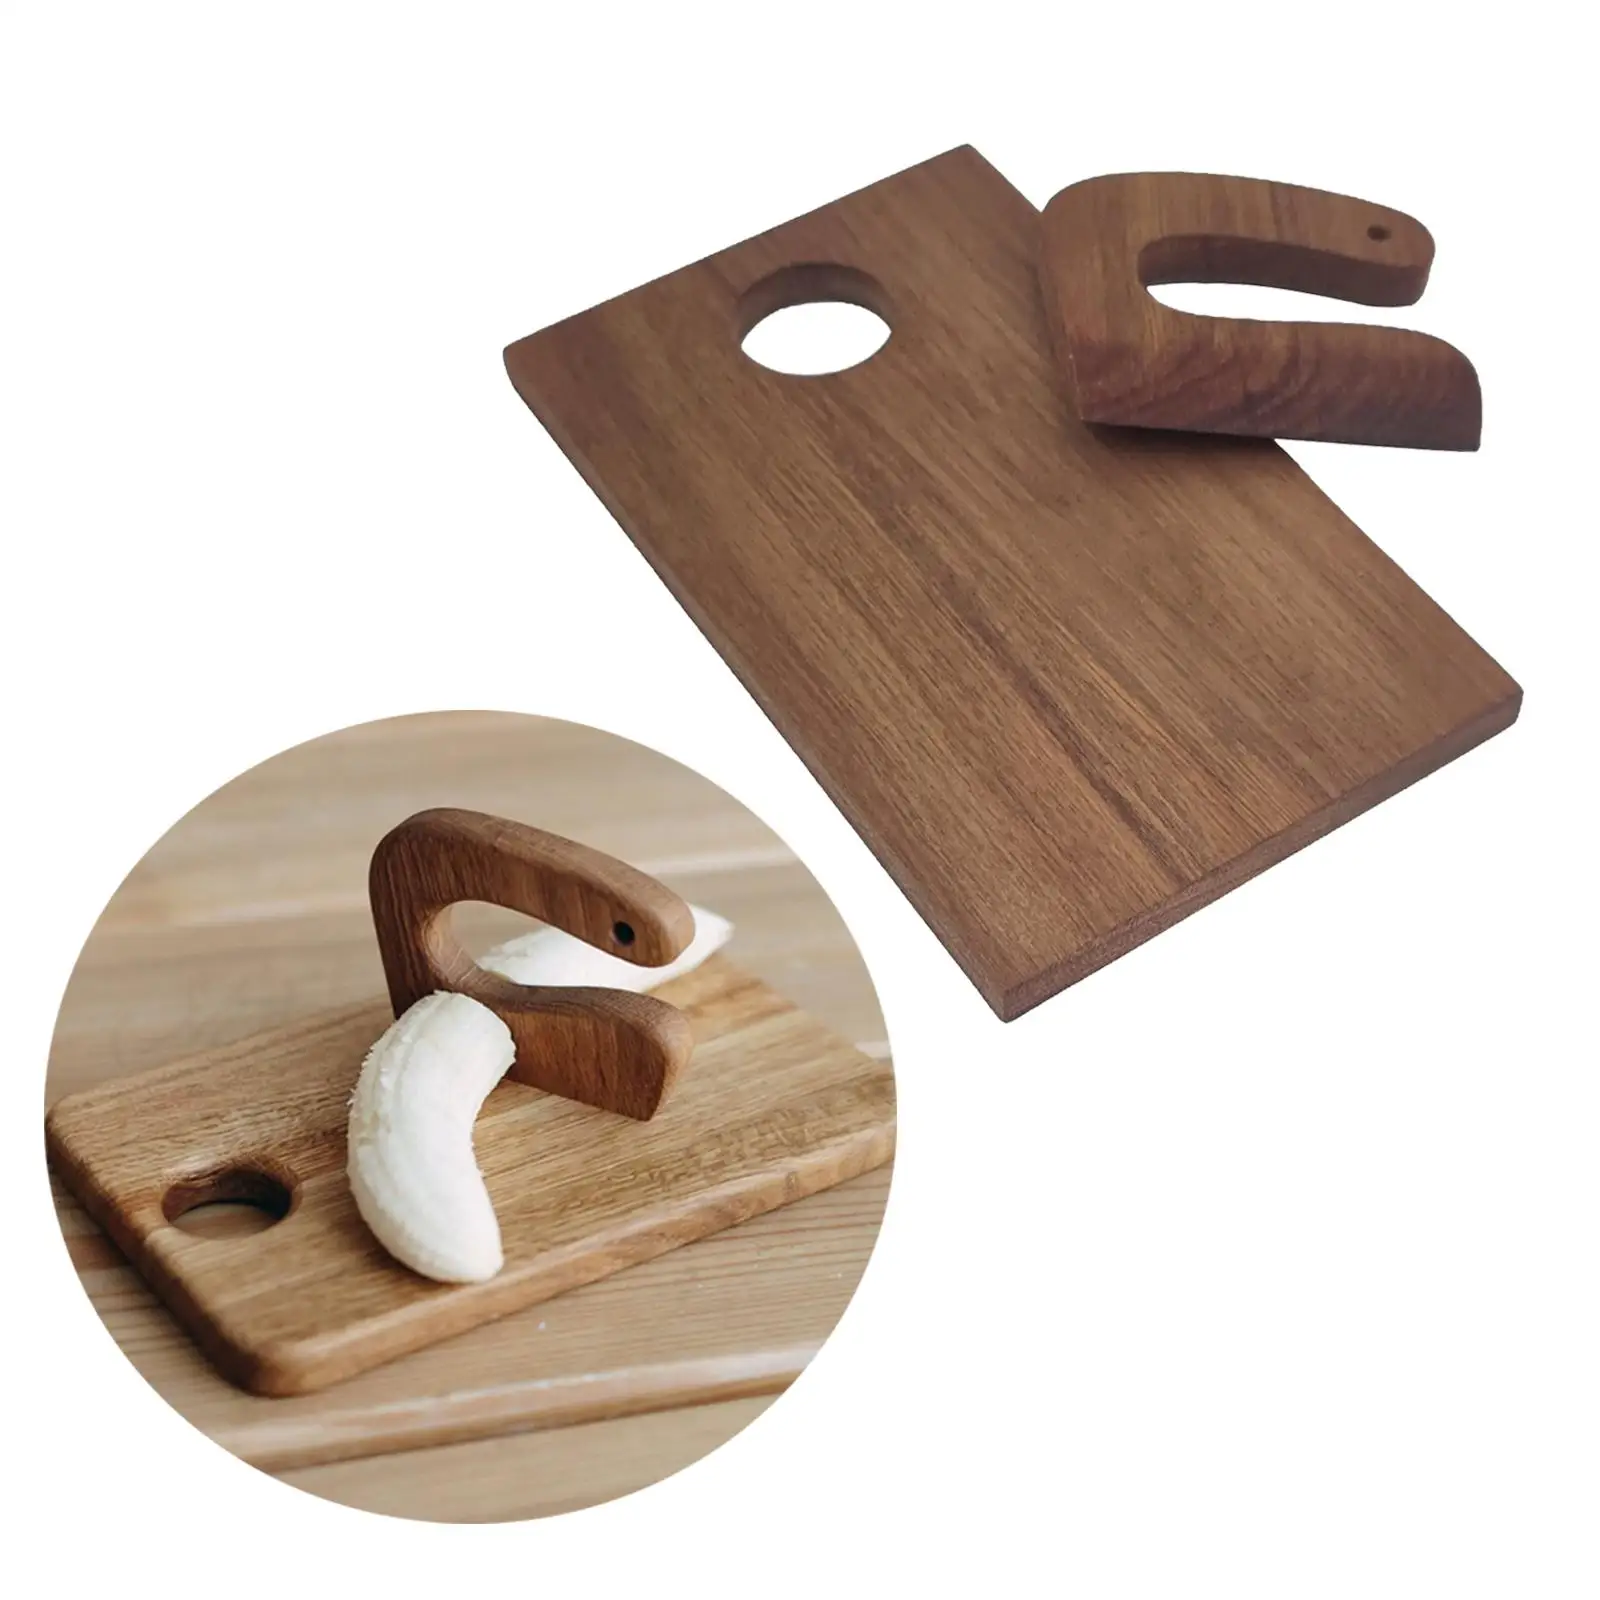  Wooden  and  Set Handmade Pretend  Cooking  Kitchen Tools for Avocados Cheese Cakes Fruits